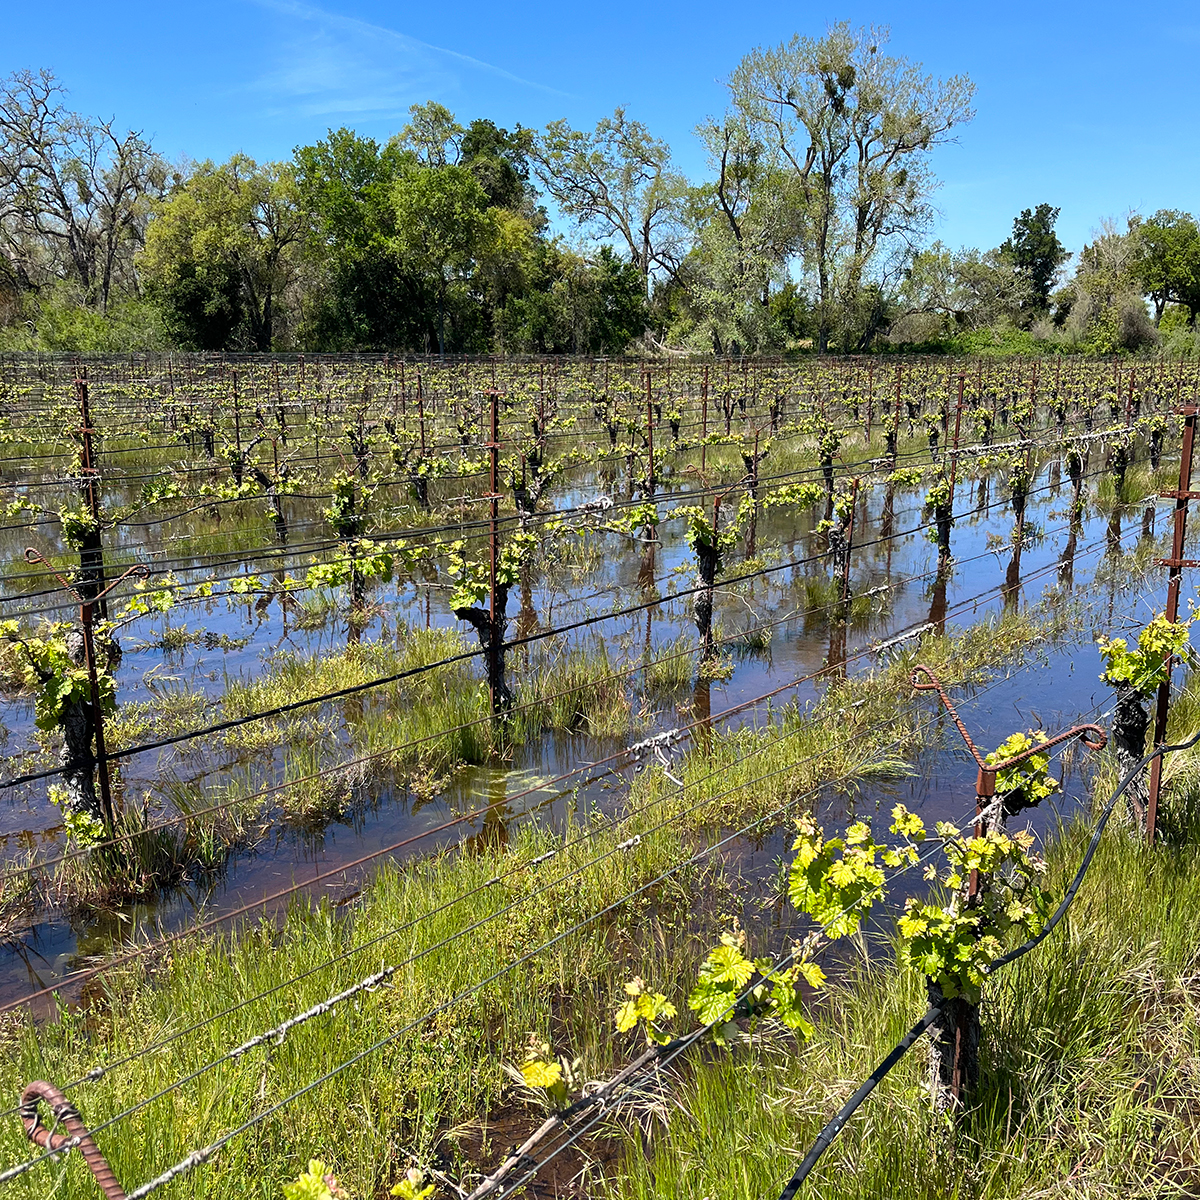 Rows of grape vines on wires with the start of small yellowish green leaves just after budbreak. The vineyard is flooded with tufts of green grass emerging from under the water.